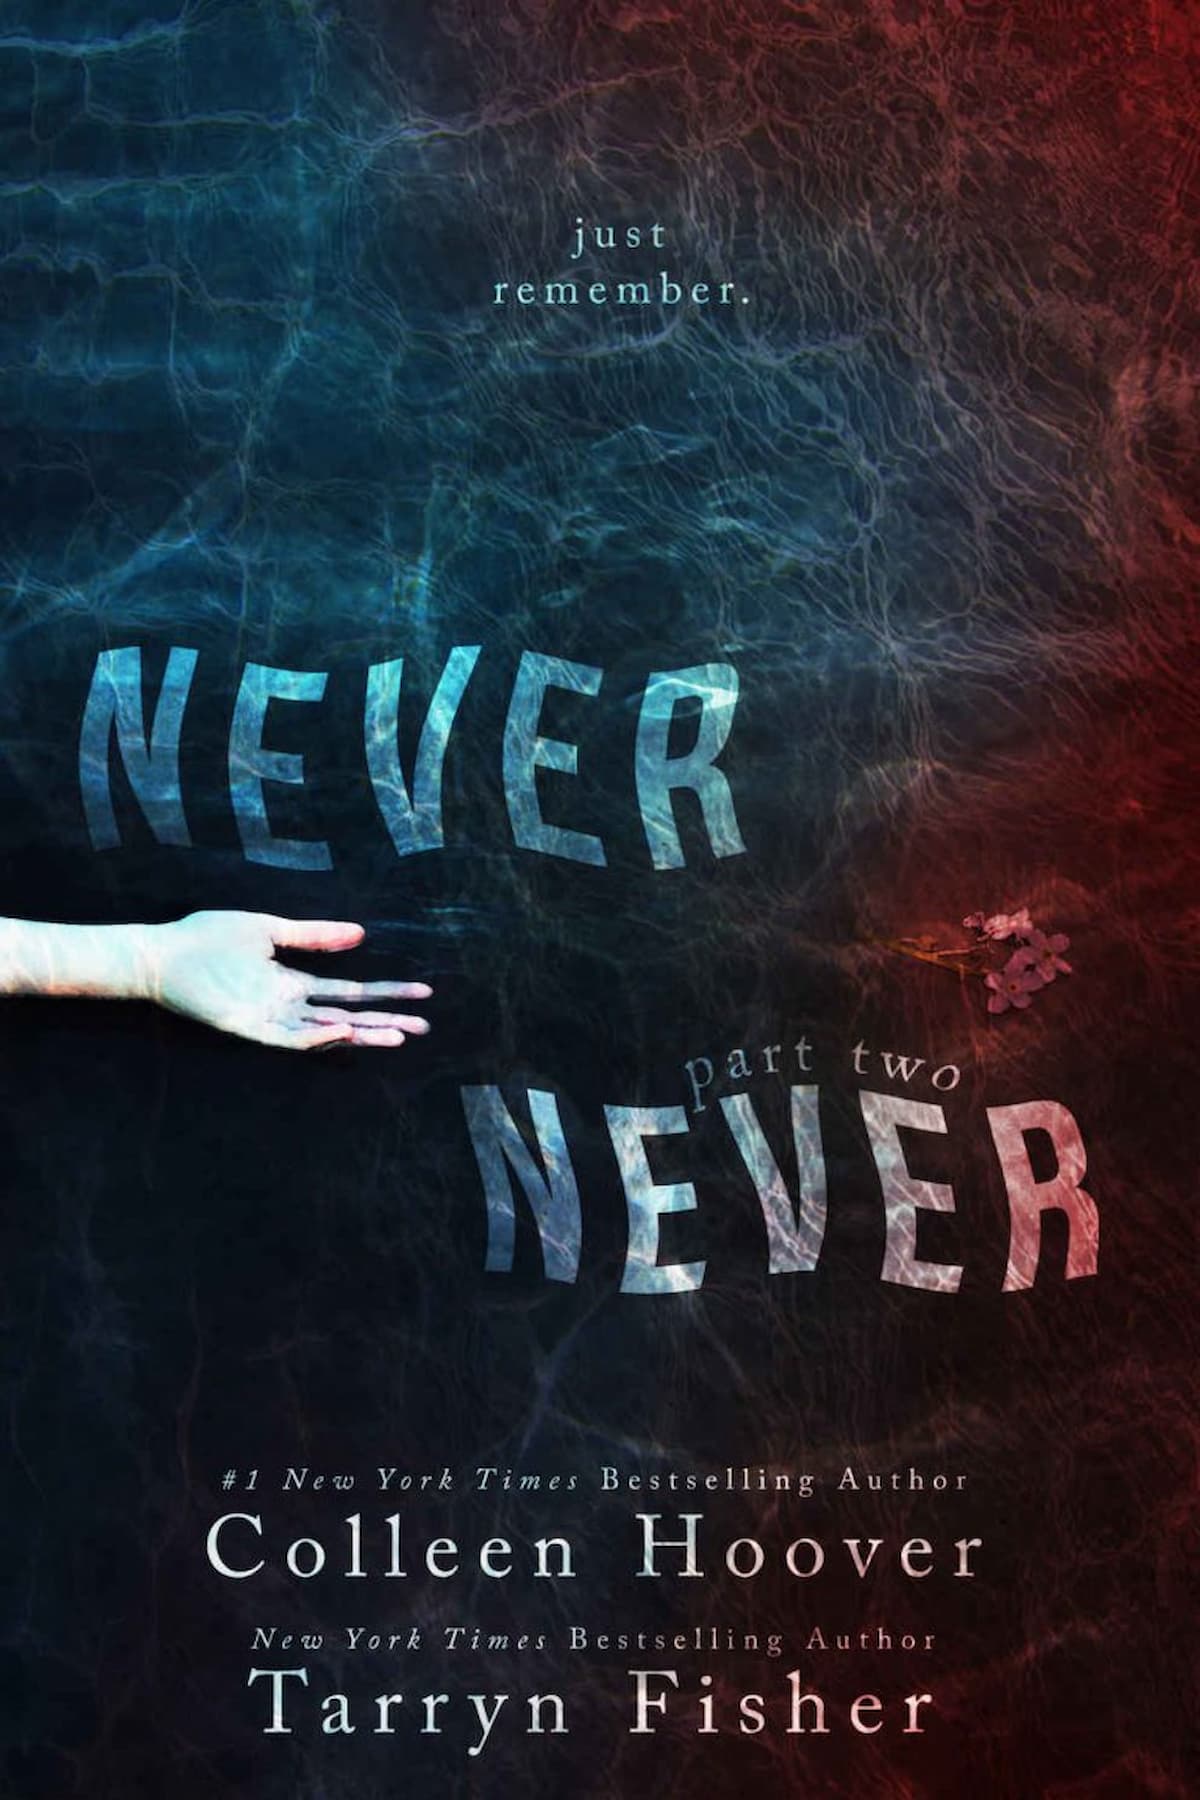 Never Never Part 2 By Colleen Hoover (Never Never Series Book 2), Colleen Hoover Books In Order, Fiction, Never Never Books In Order, Never Never series, New Adult Romance, Romance, Romantic Suspense, Teen and Young Adult